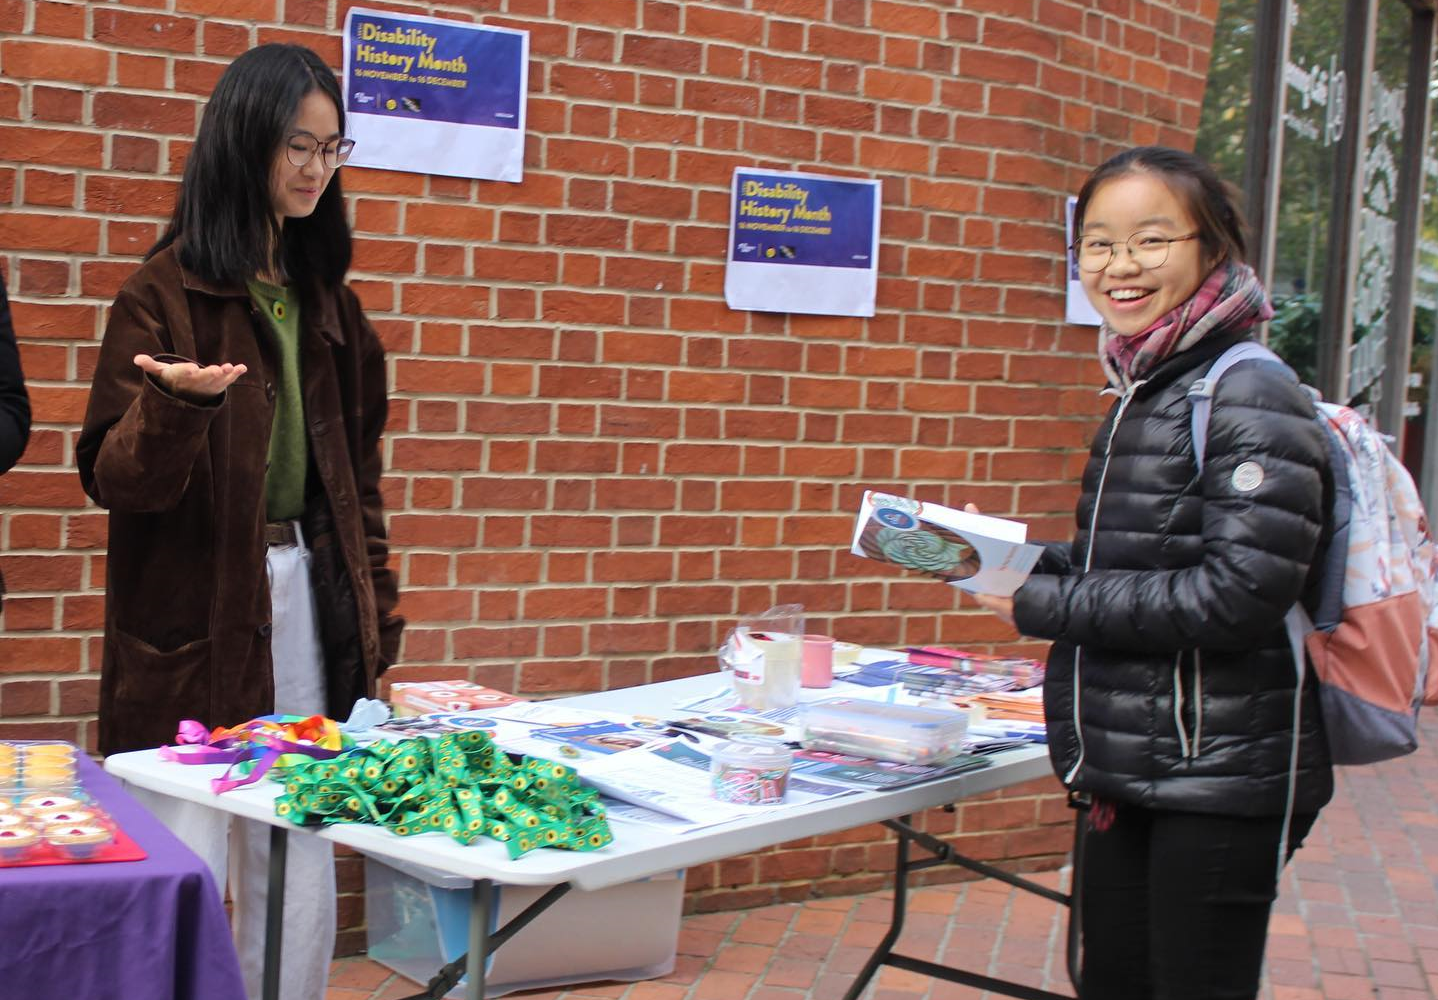 Disability-related information stall